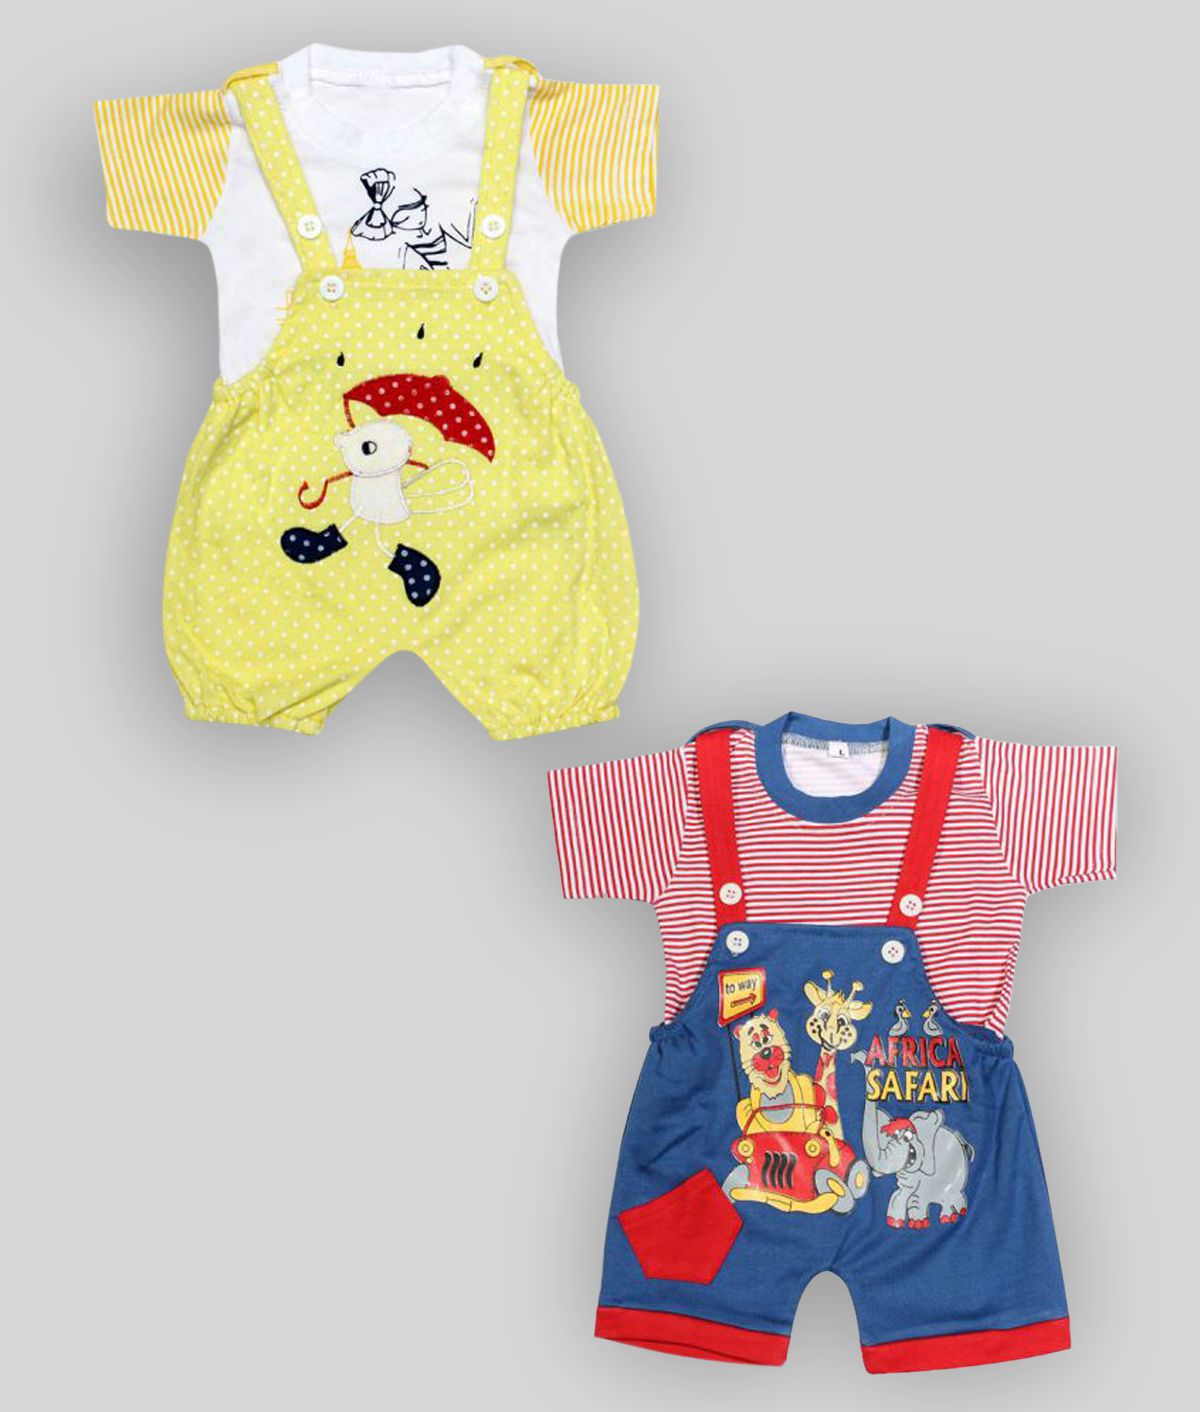     			babeezworld dungaree for Boys & Girls casual printed pure cotton-Pack of 2 (9101990001165; Multi Colour)